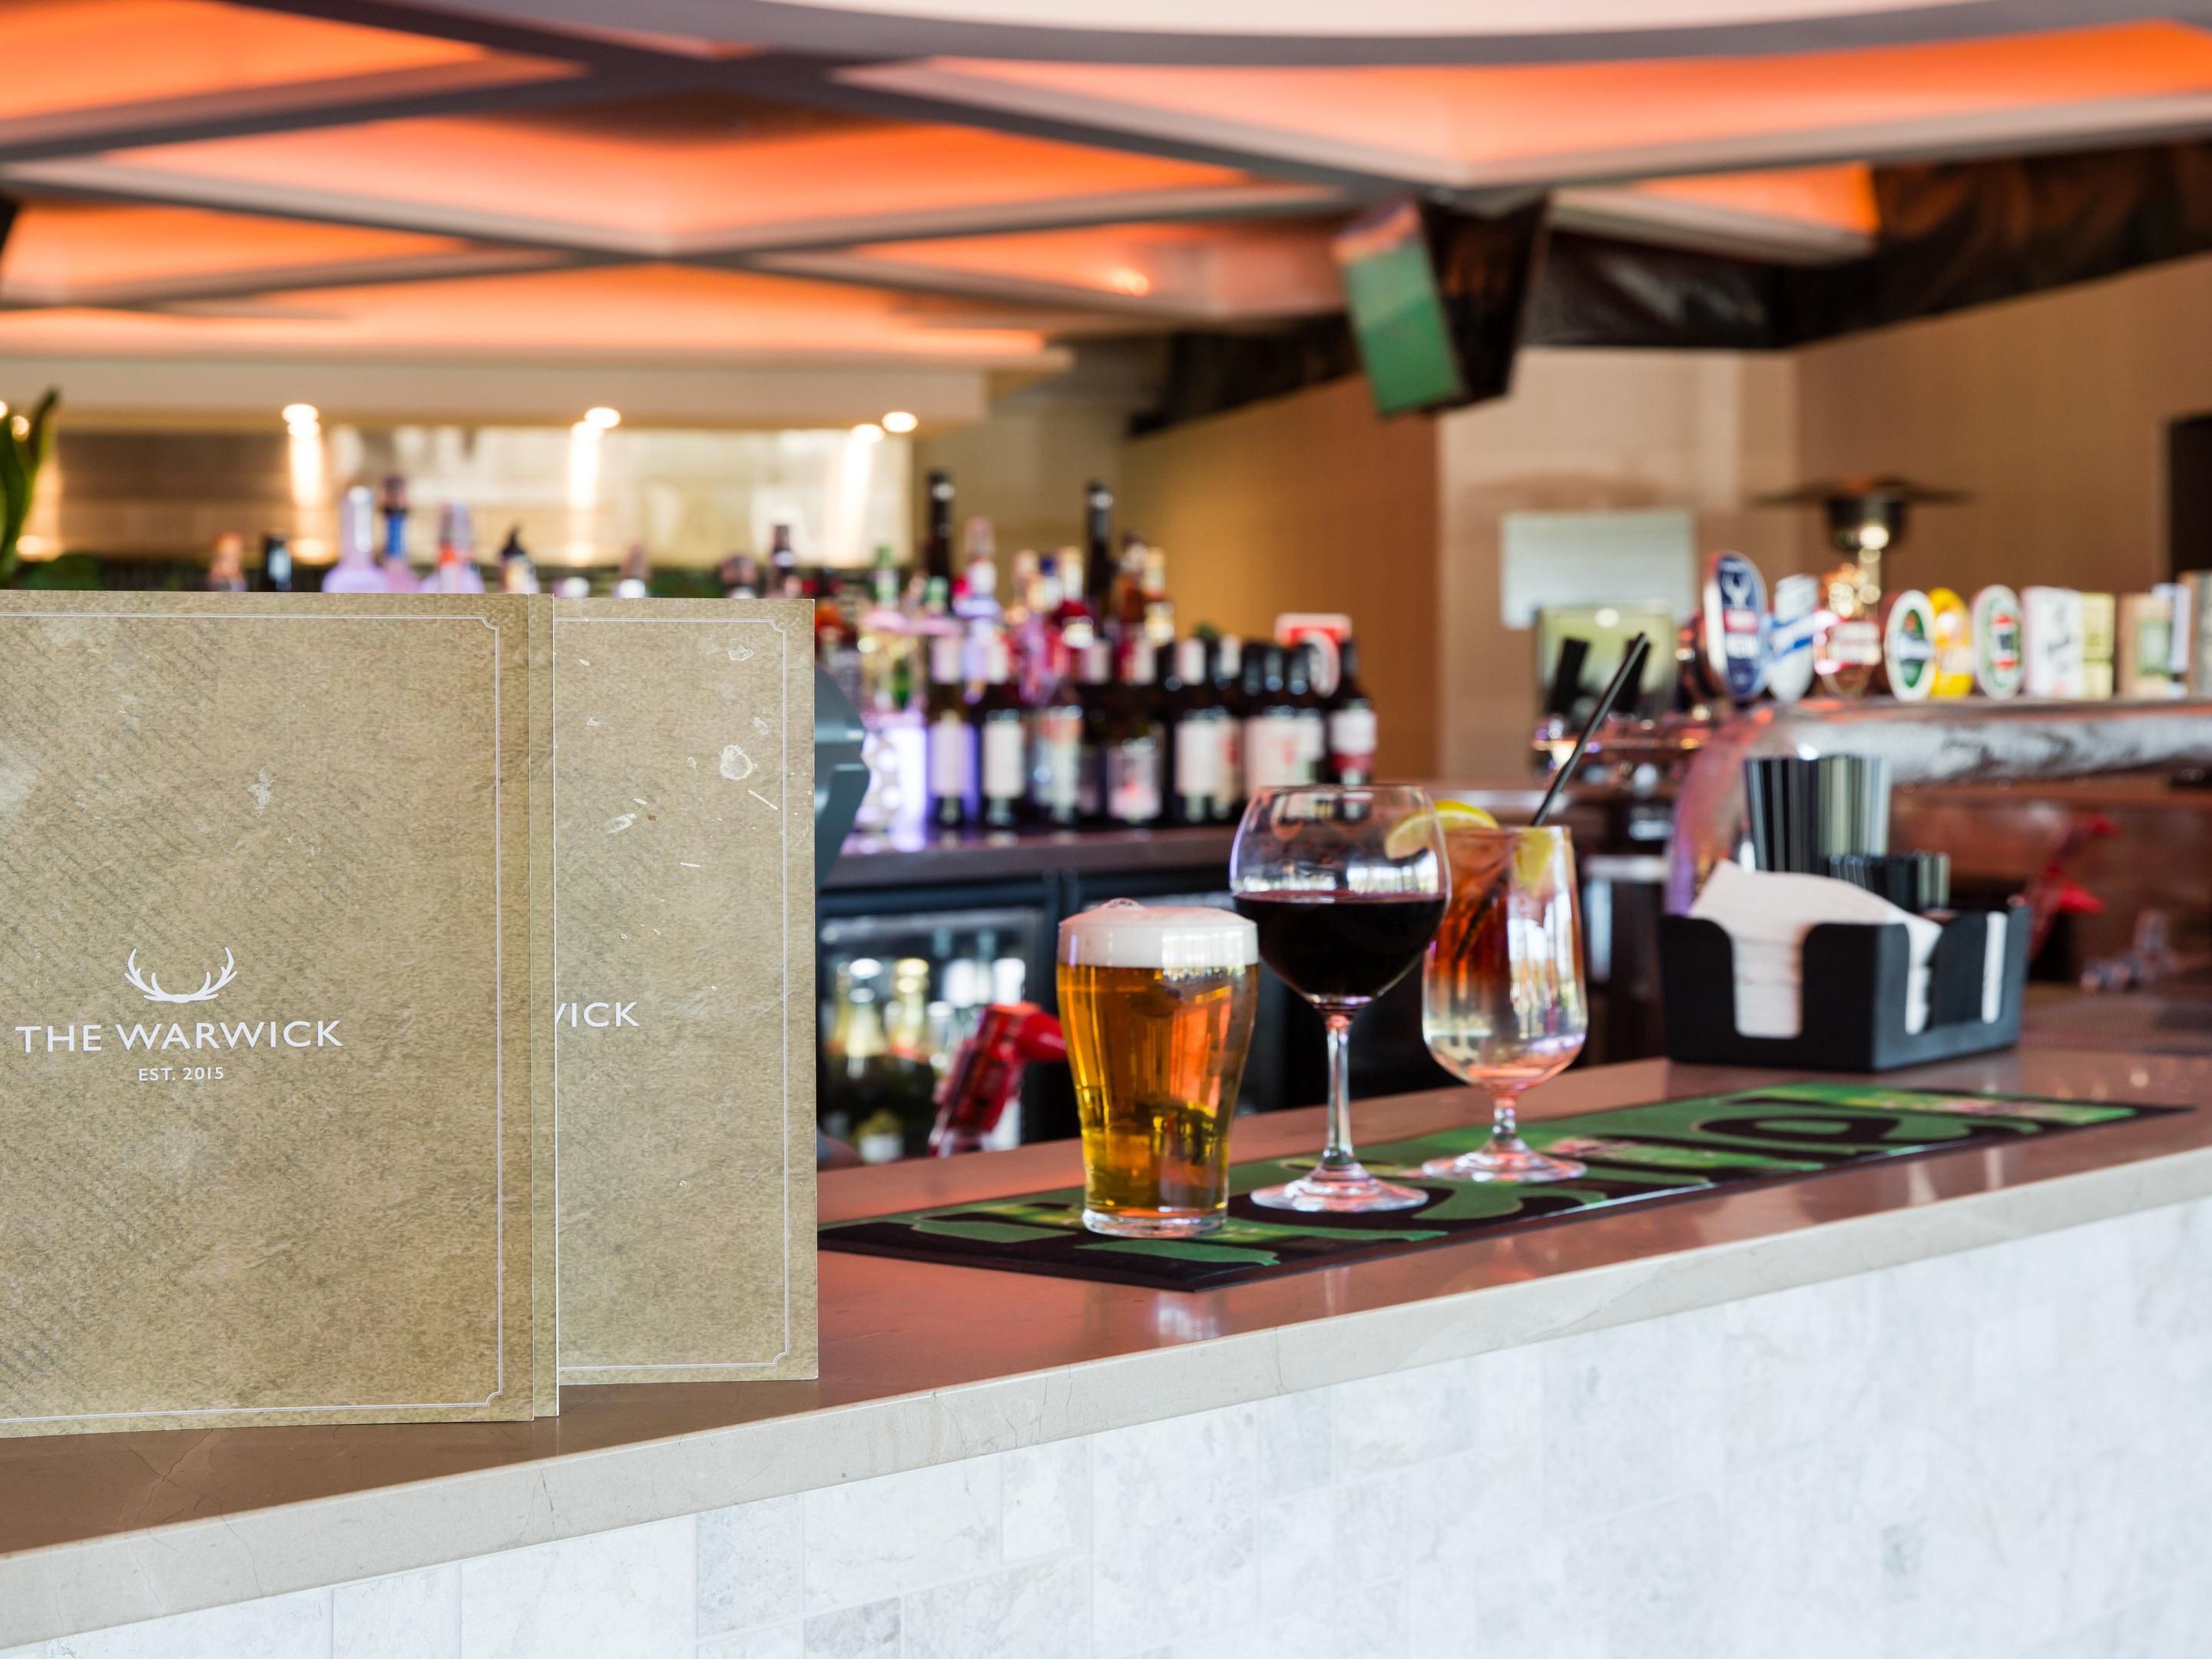 Stay & dine with us in-house at The Warwick Bar, Bistro & Grill. 
Featuring an oversized 360-degree bar, wrap around balcony overlooking parklands, a sun-drenched beer garden, TAB facilities, VIP lounge & an extensive menu specialising in honest pub food with a fusion twist. 